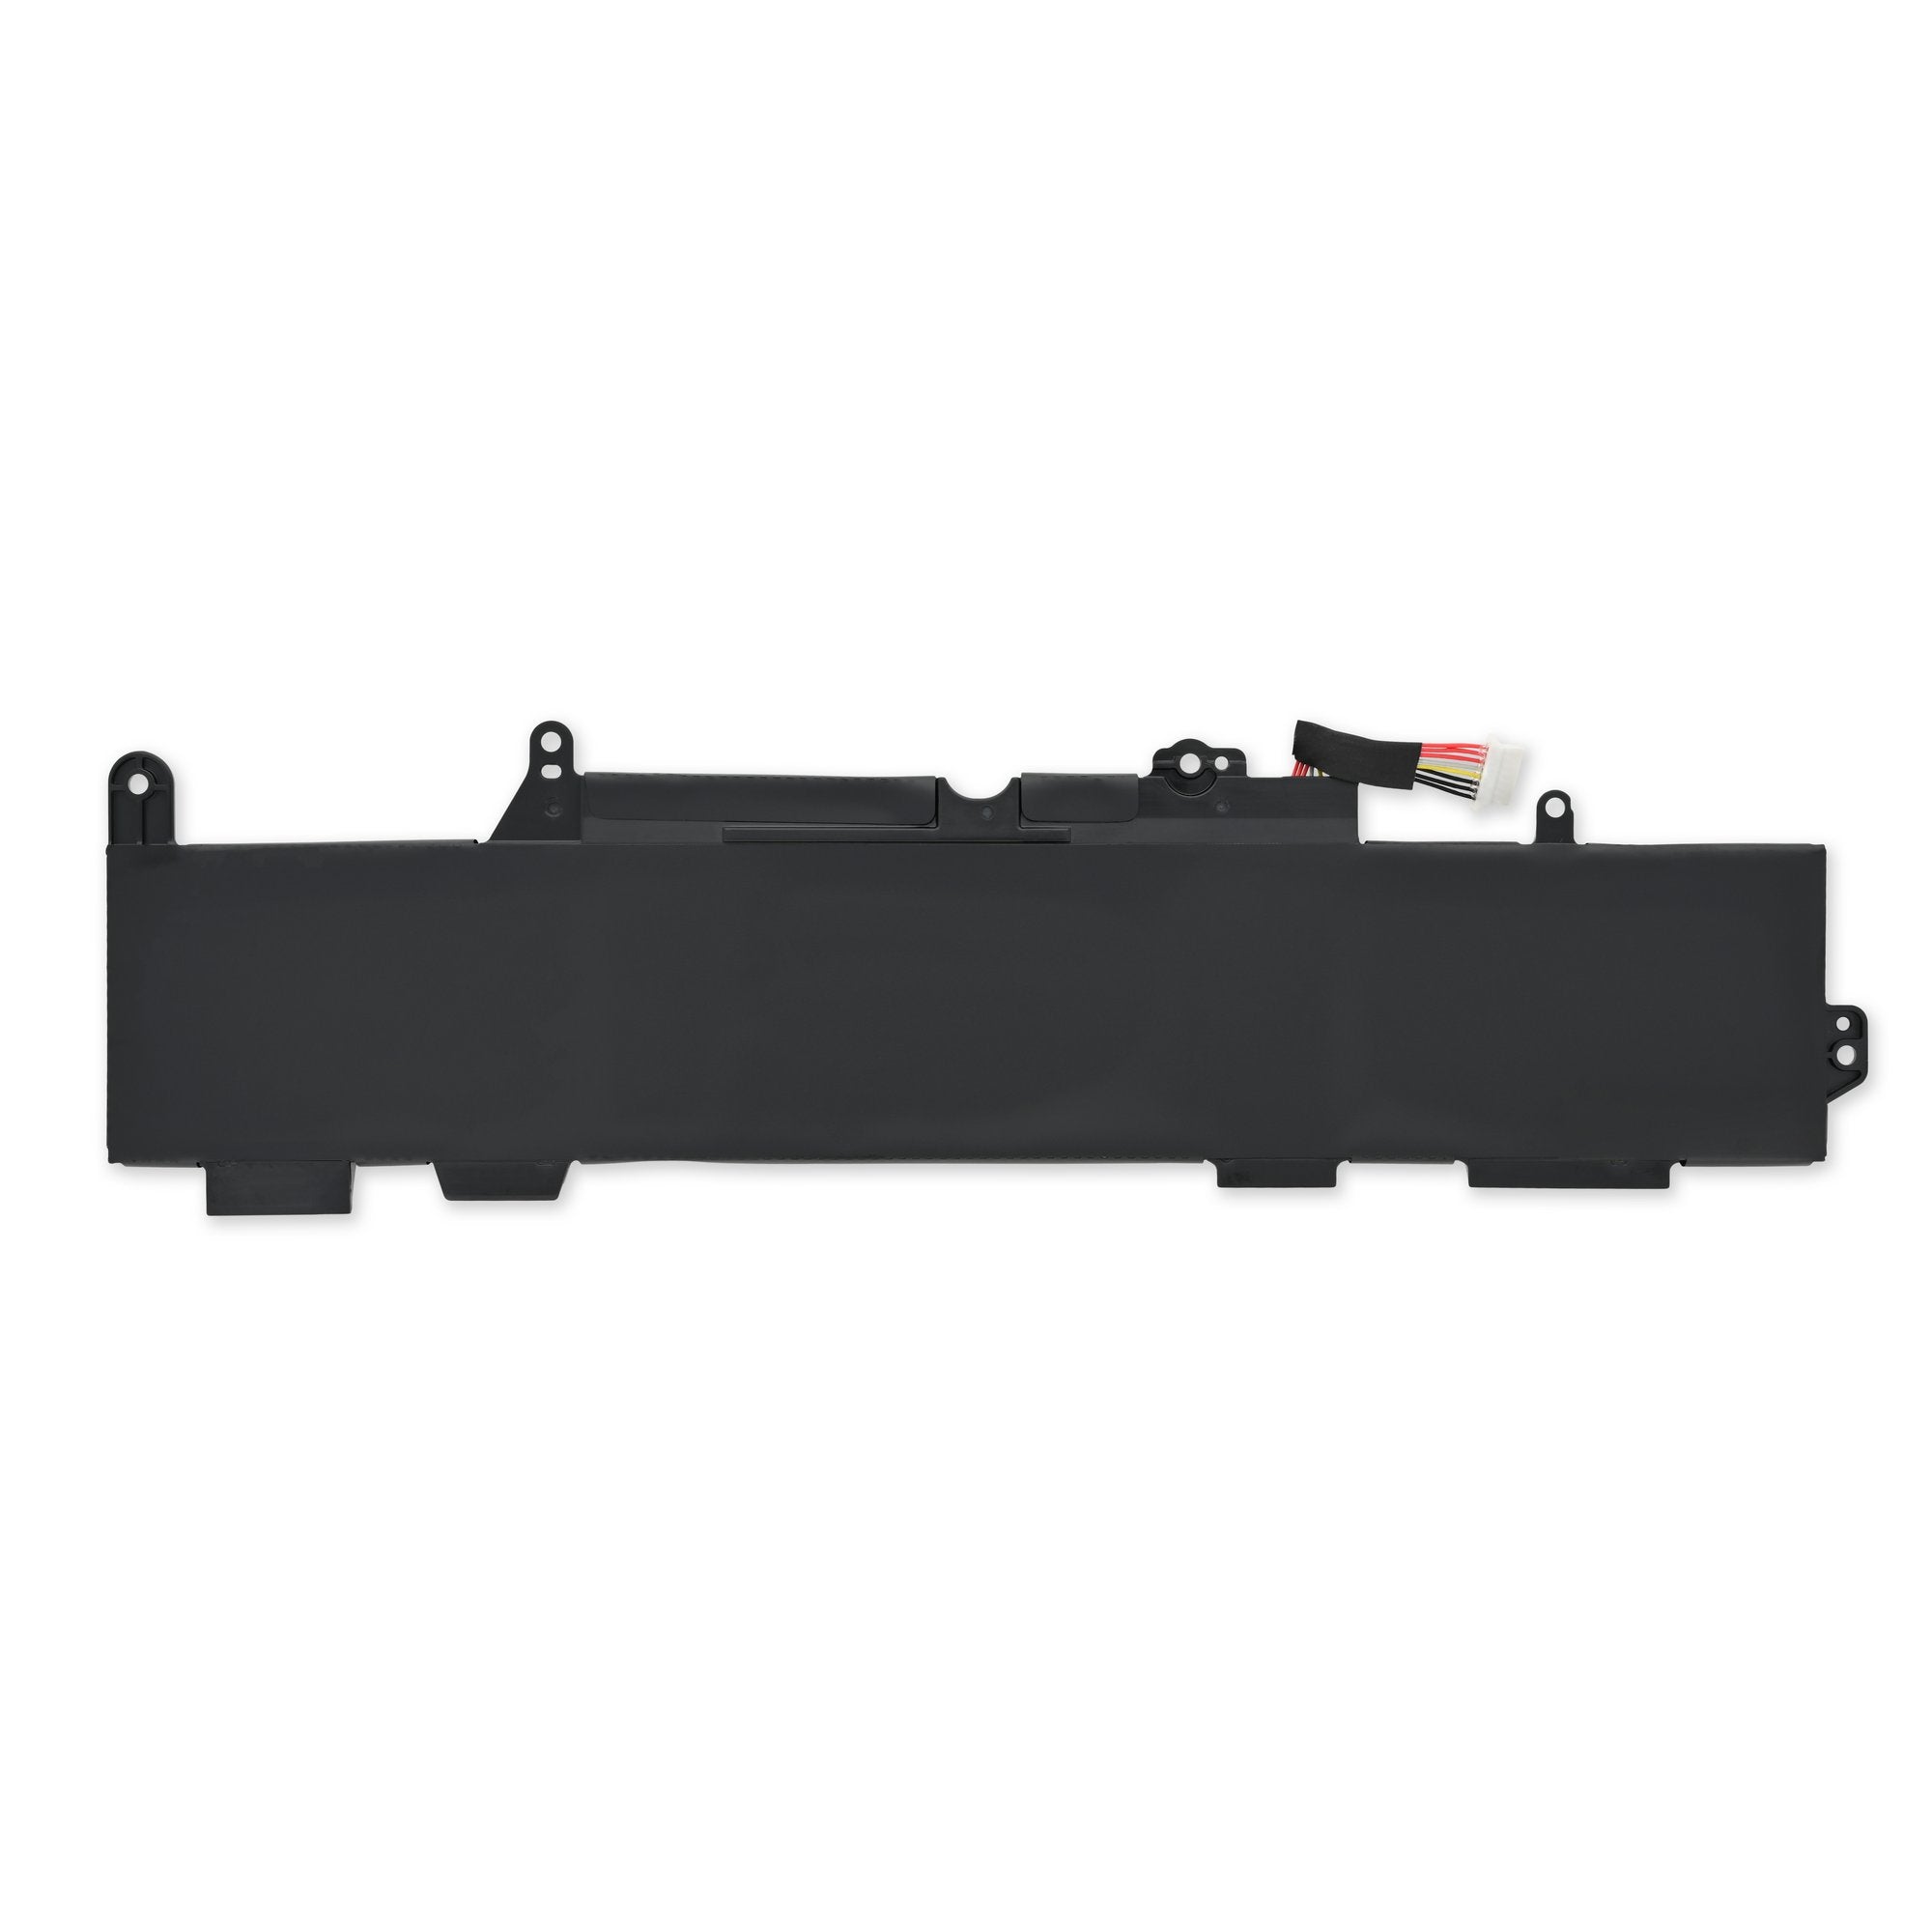 HP EliteBook 830, 840, 735, and 745 G5 Battery New Part Only